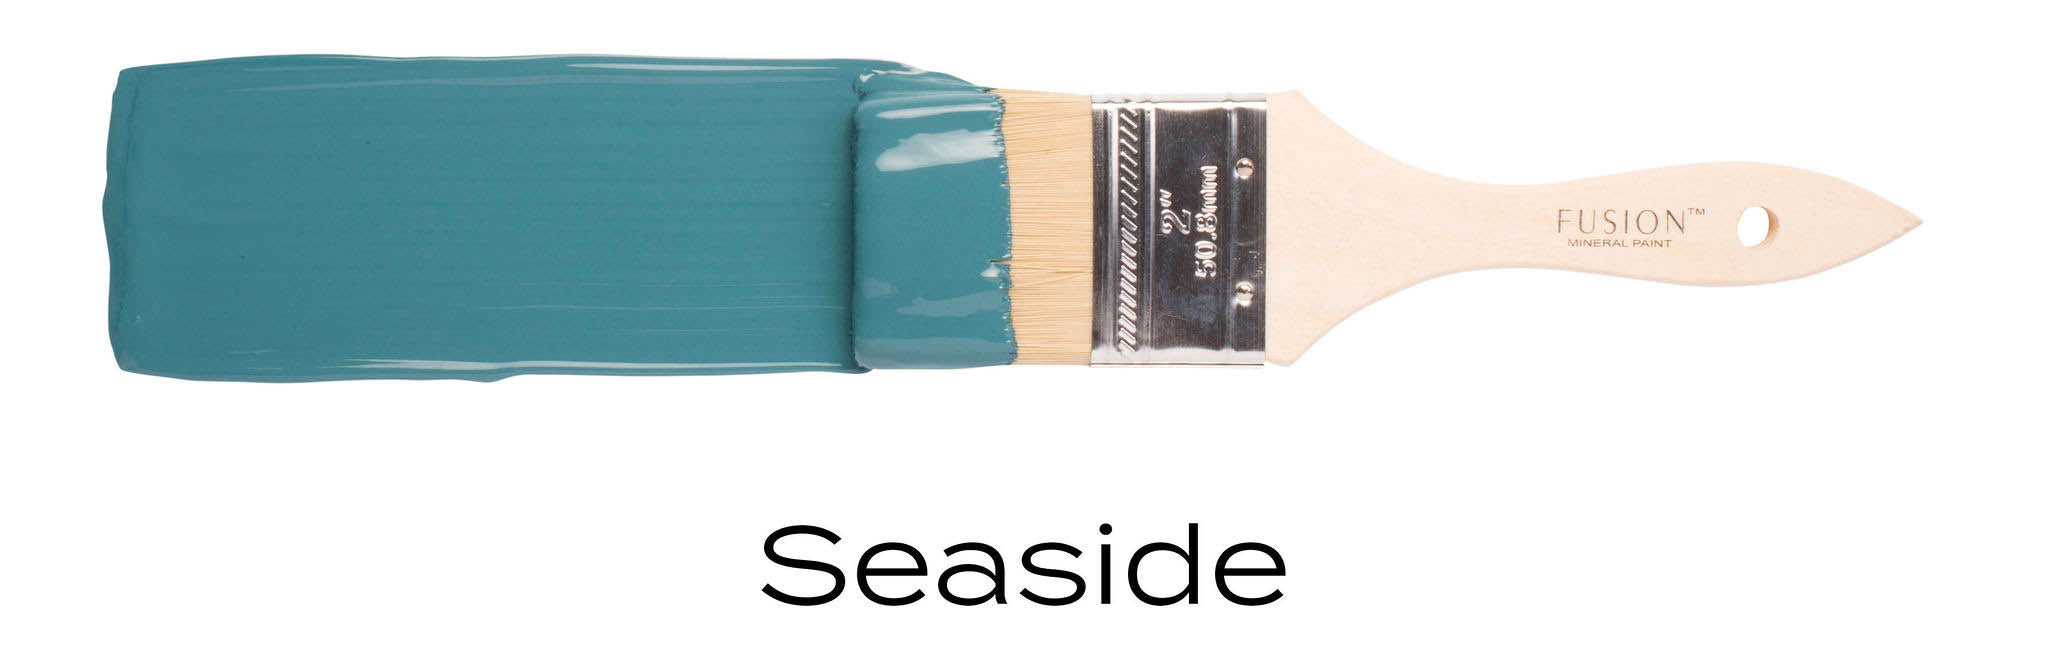 Seaside rich blue colour fusion mineral paint example on paint brush